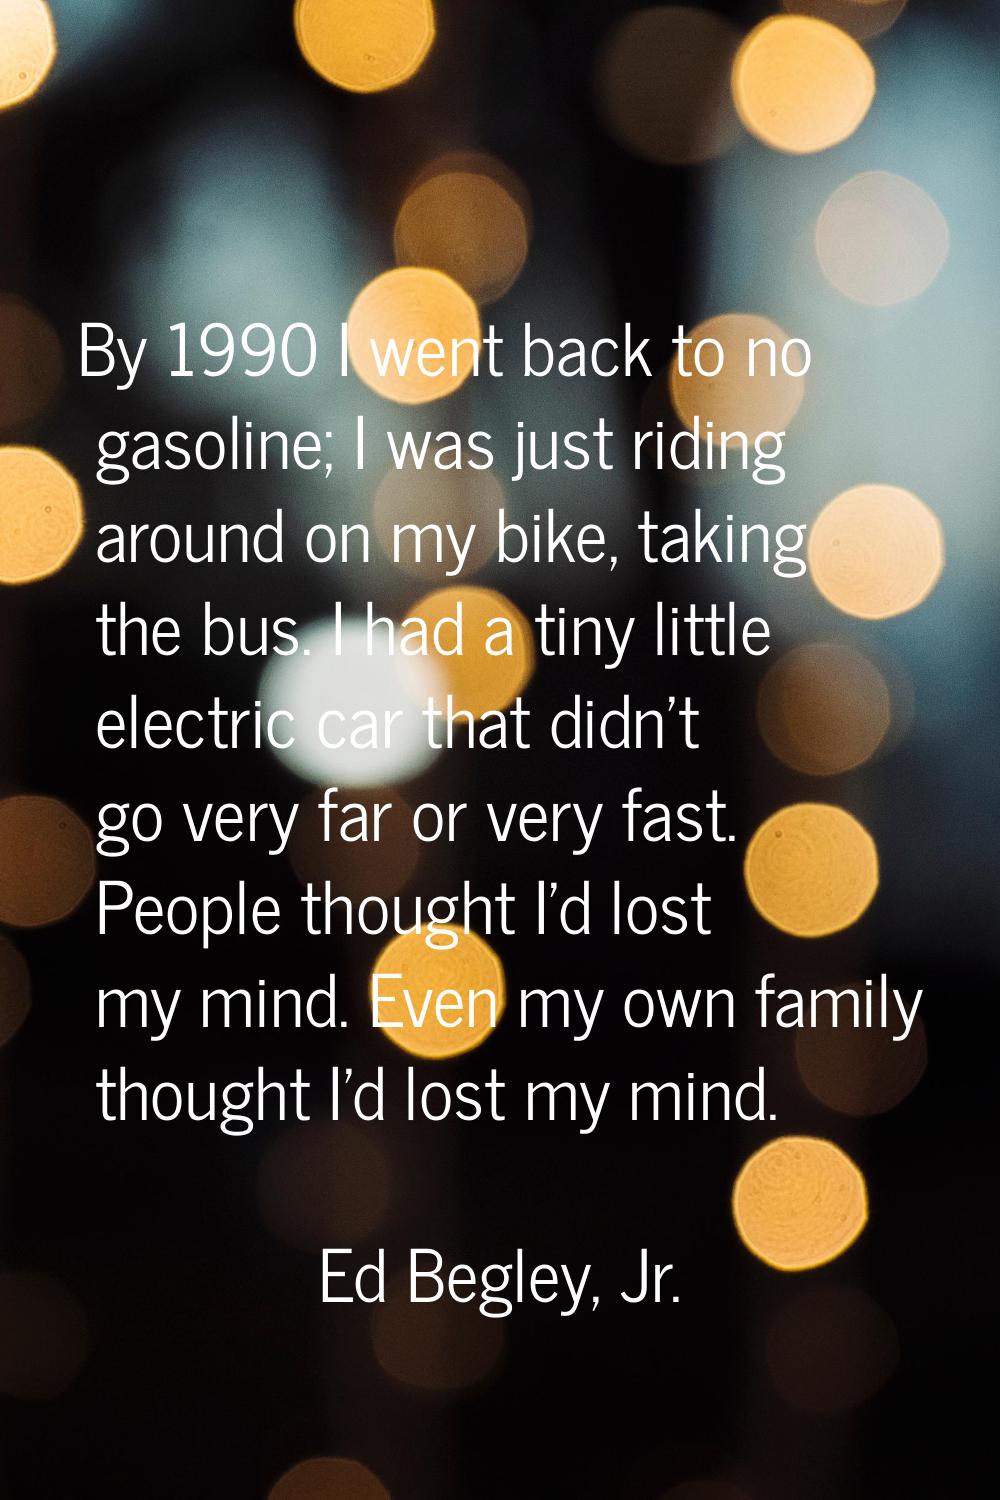 By 1990 I went back to no gasoline; I was just riding around on my bike, taking the bus. I had a ti